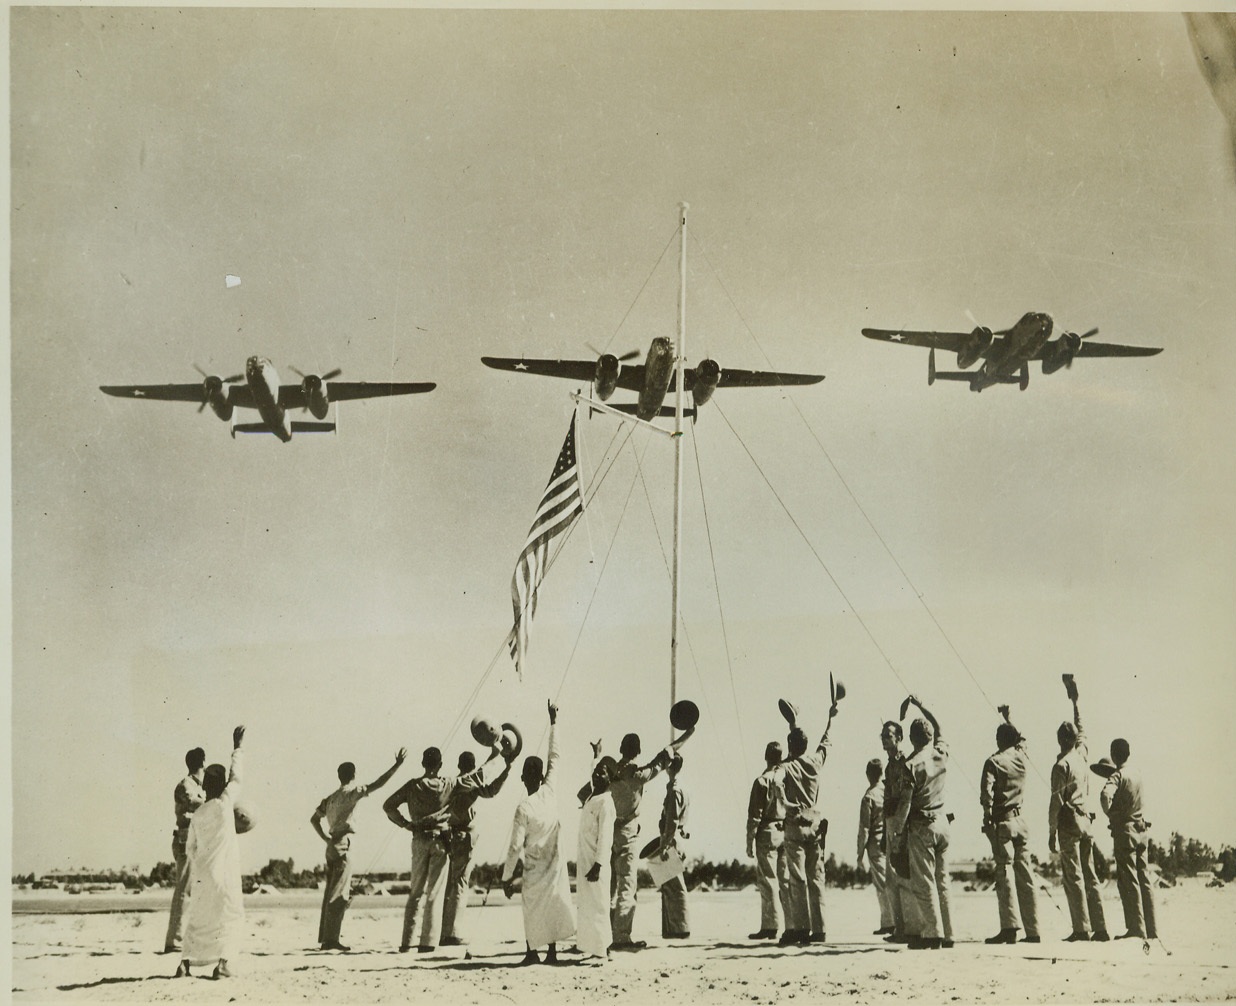 American Bombers Get Welcoming Committee, 9/12/1942. Middle East – Three U.S. medium bombers, B-52’s, get an enthusiastic welcome from their American ground crews after they have blasted Axis bases in the Middle East. The boys in native costume are mess attendants at the U.S. station. Credit: (ACME);